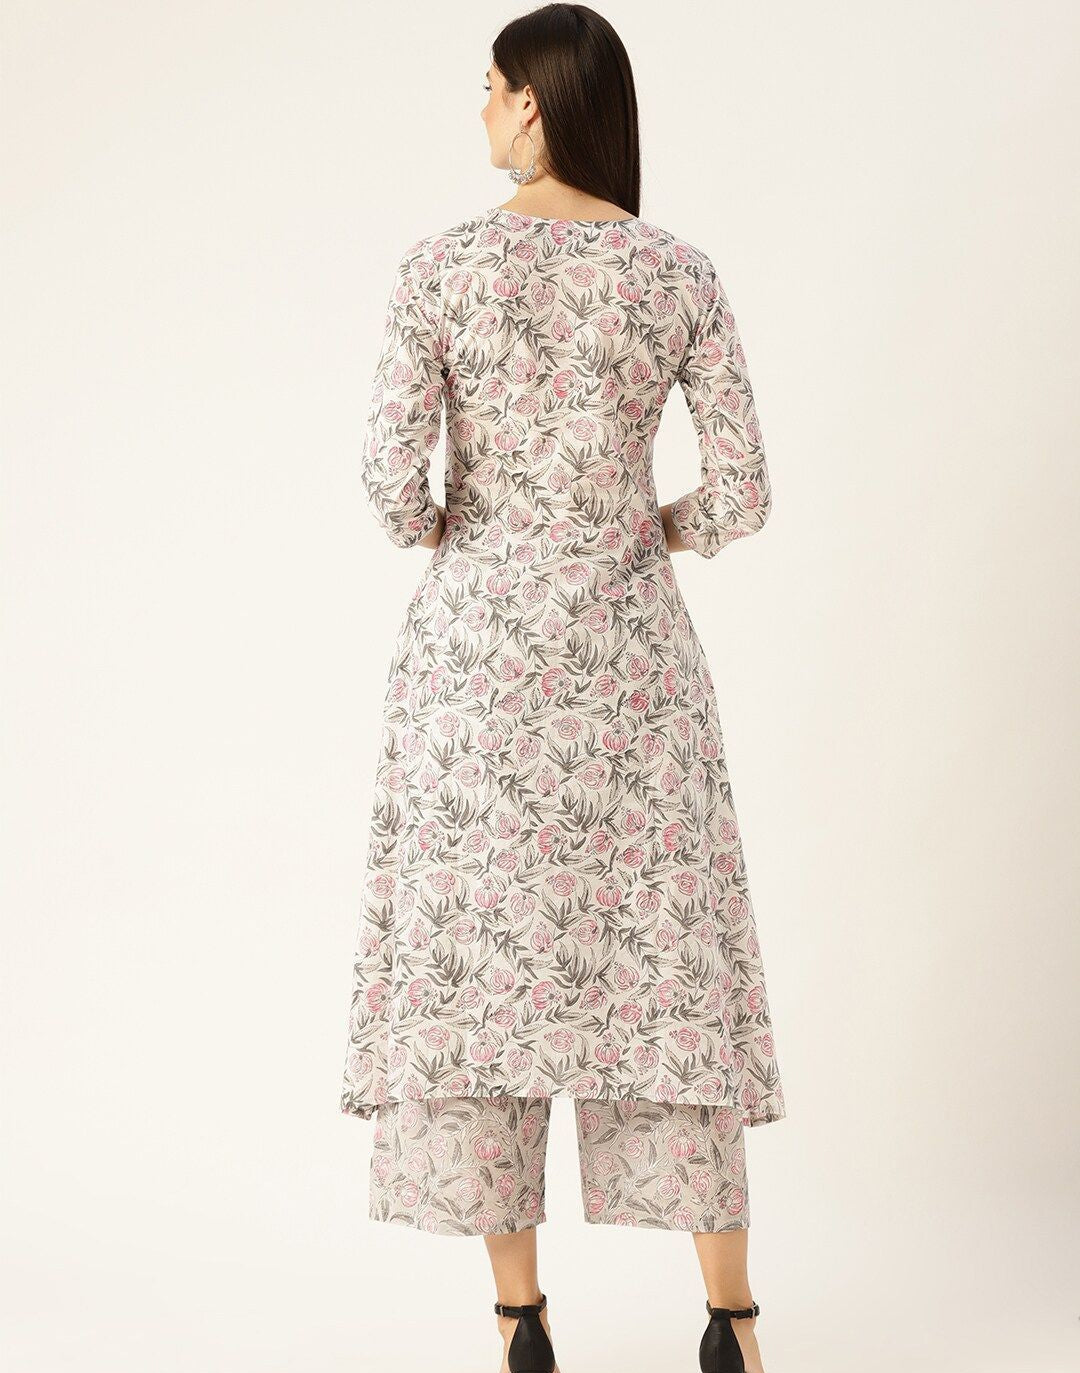 Off-White & Pink Floral Print A-Line Kurta with Palazzos